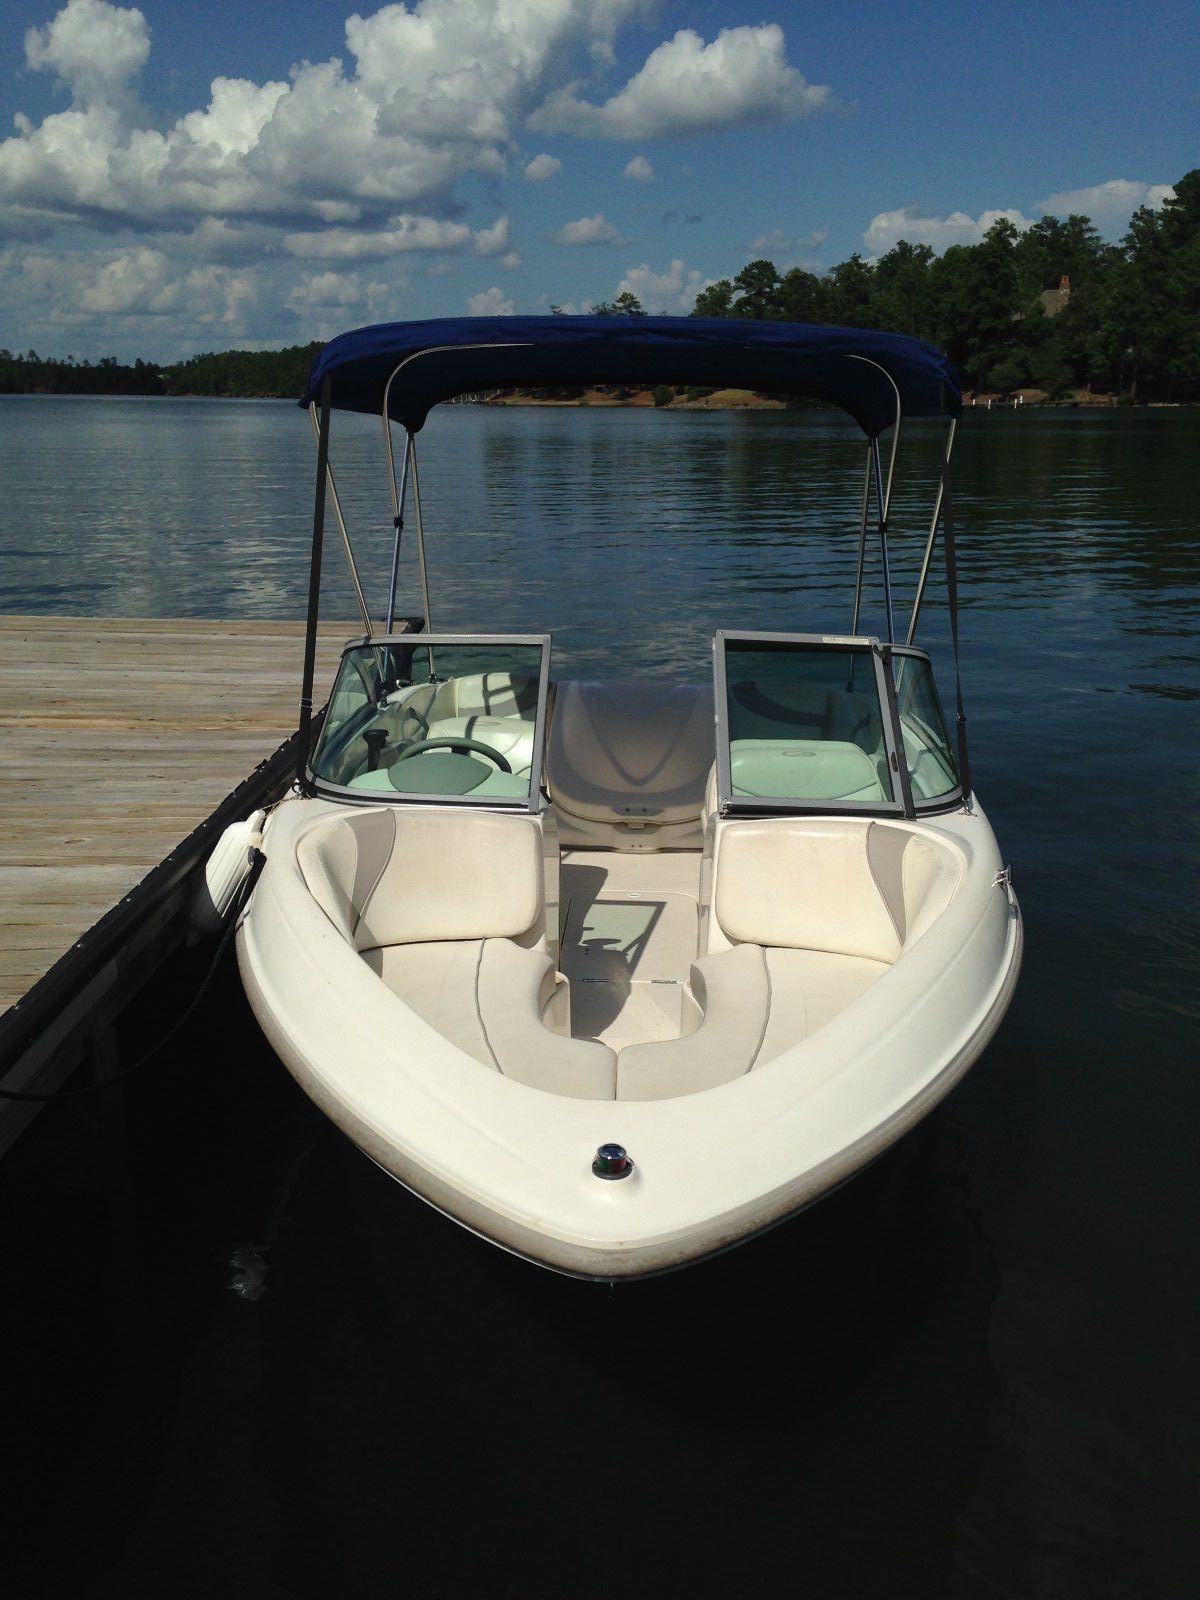 Maxum 1750SR 2003 for sale for $5,750 - Boats-from-USA.com